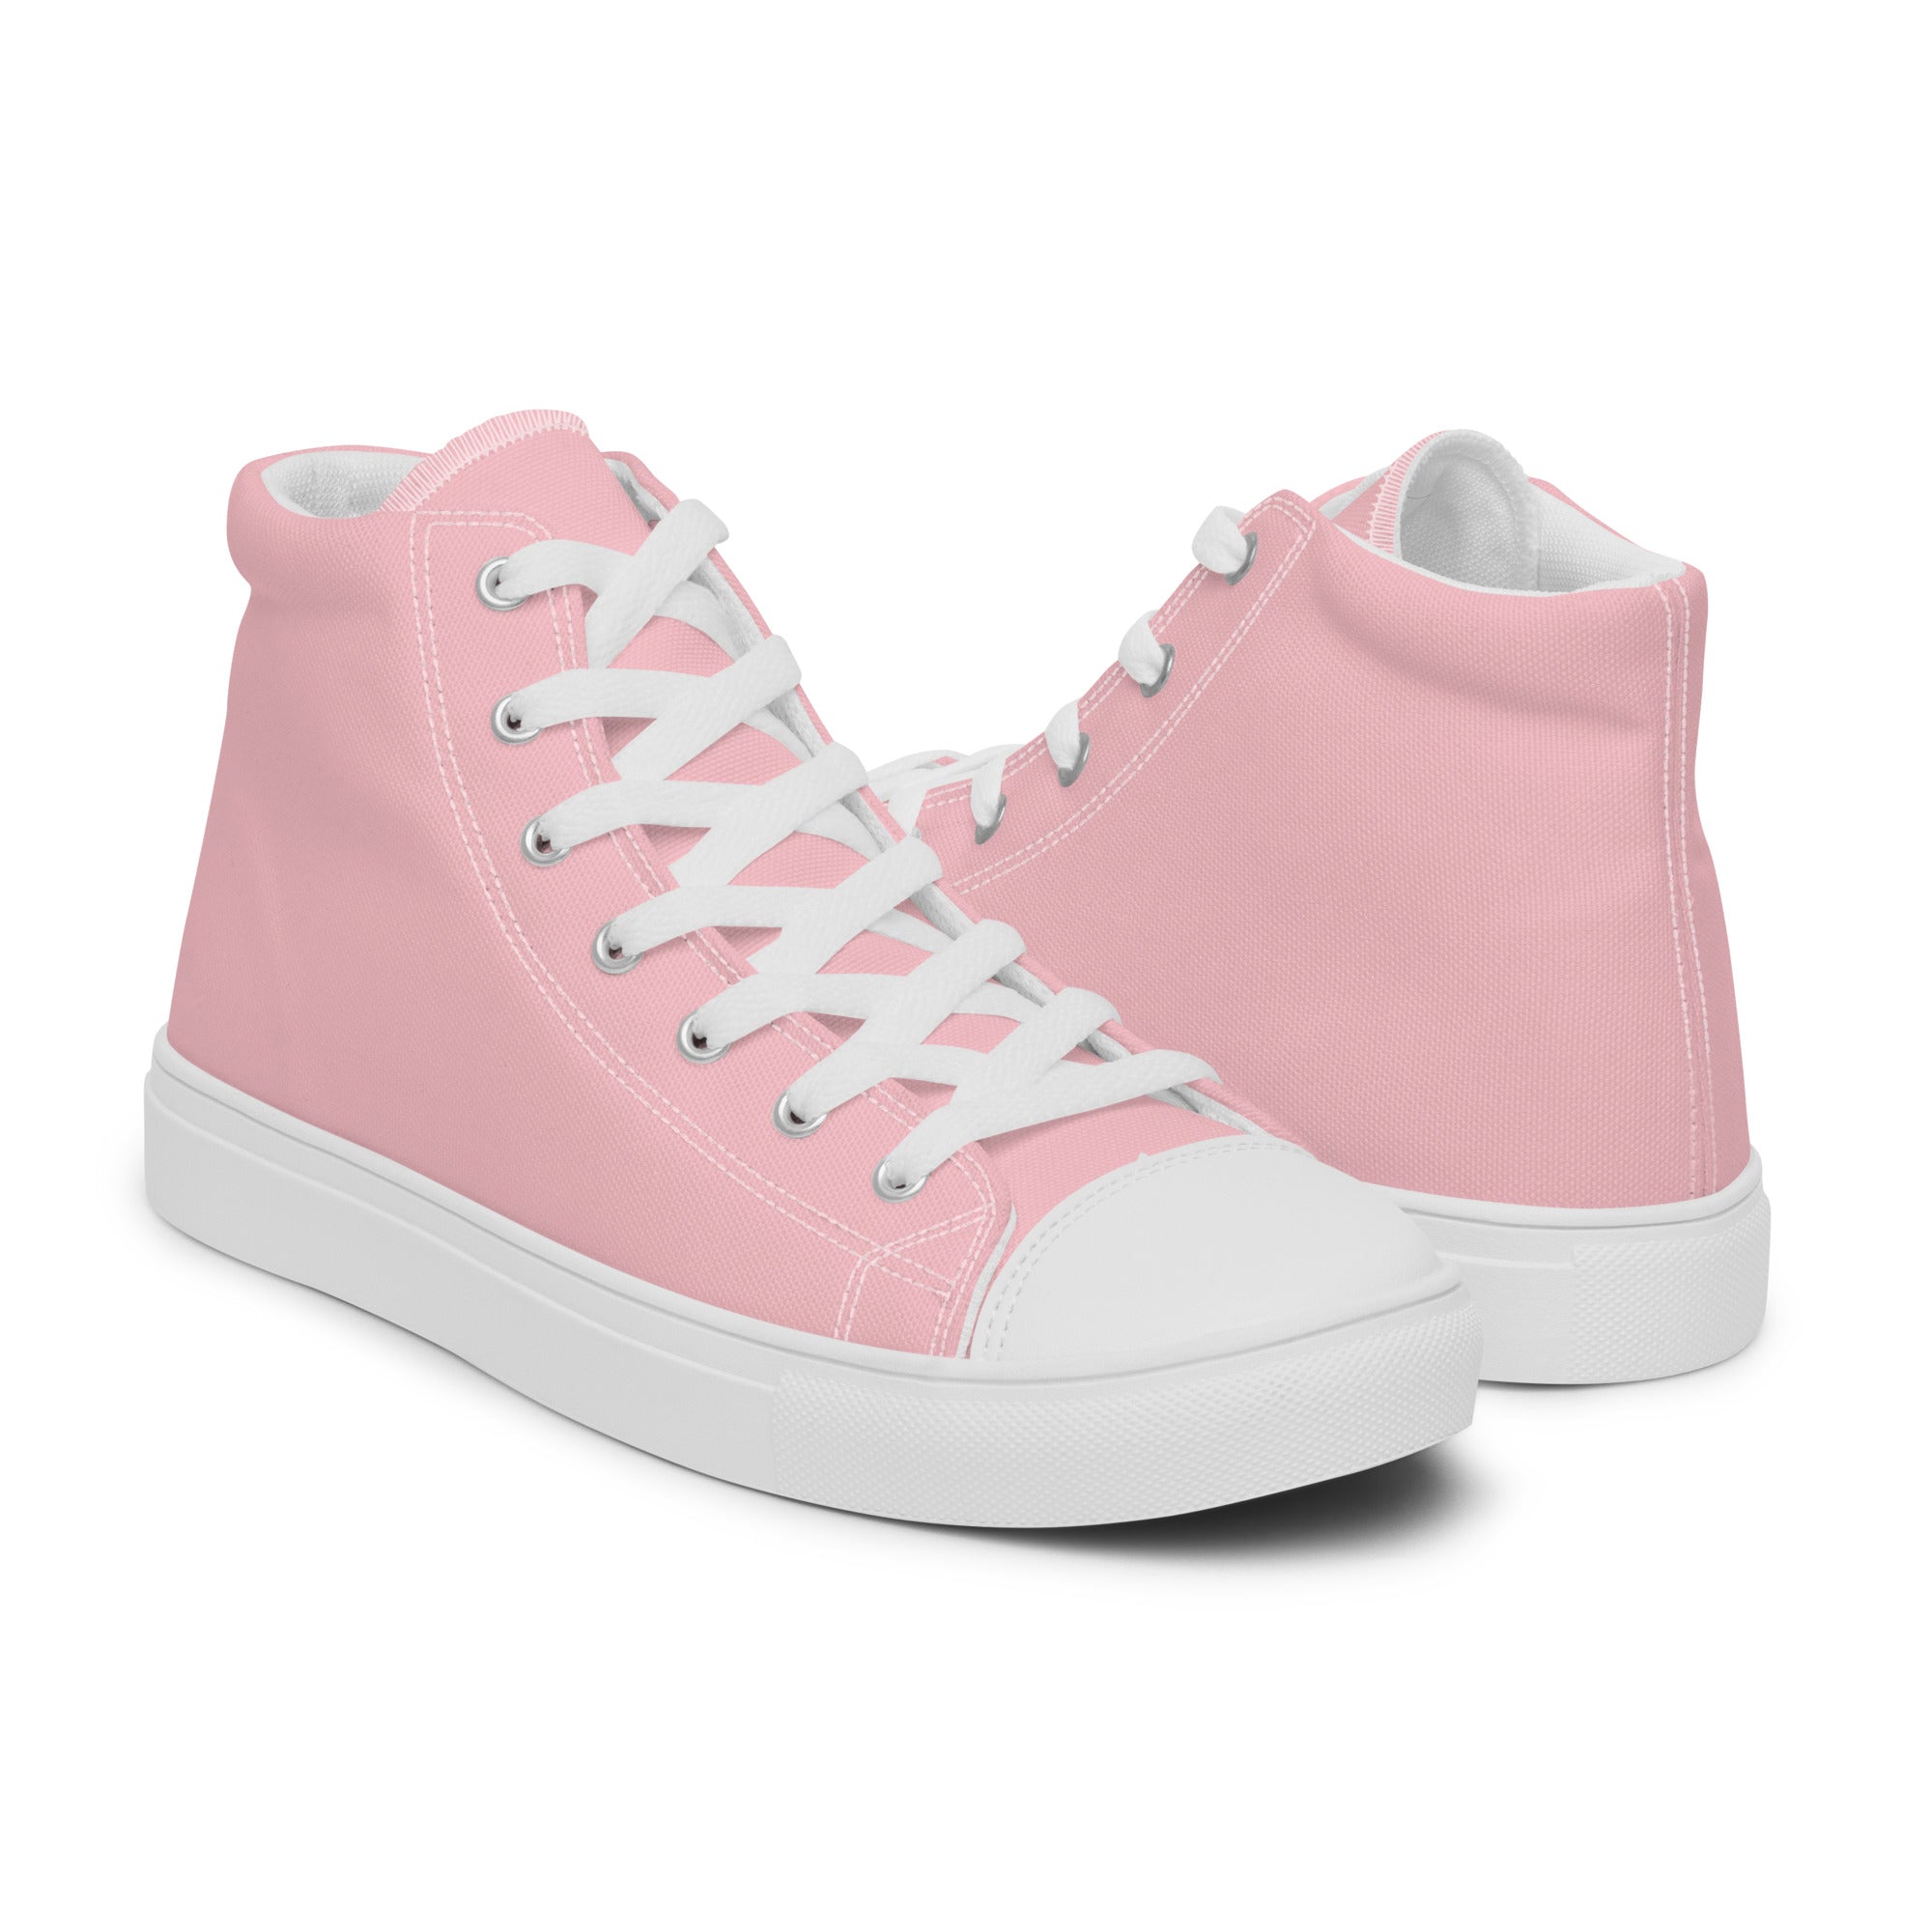 Women’s high top canvas shoes- Pink